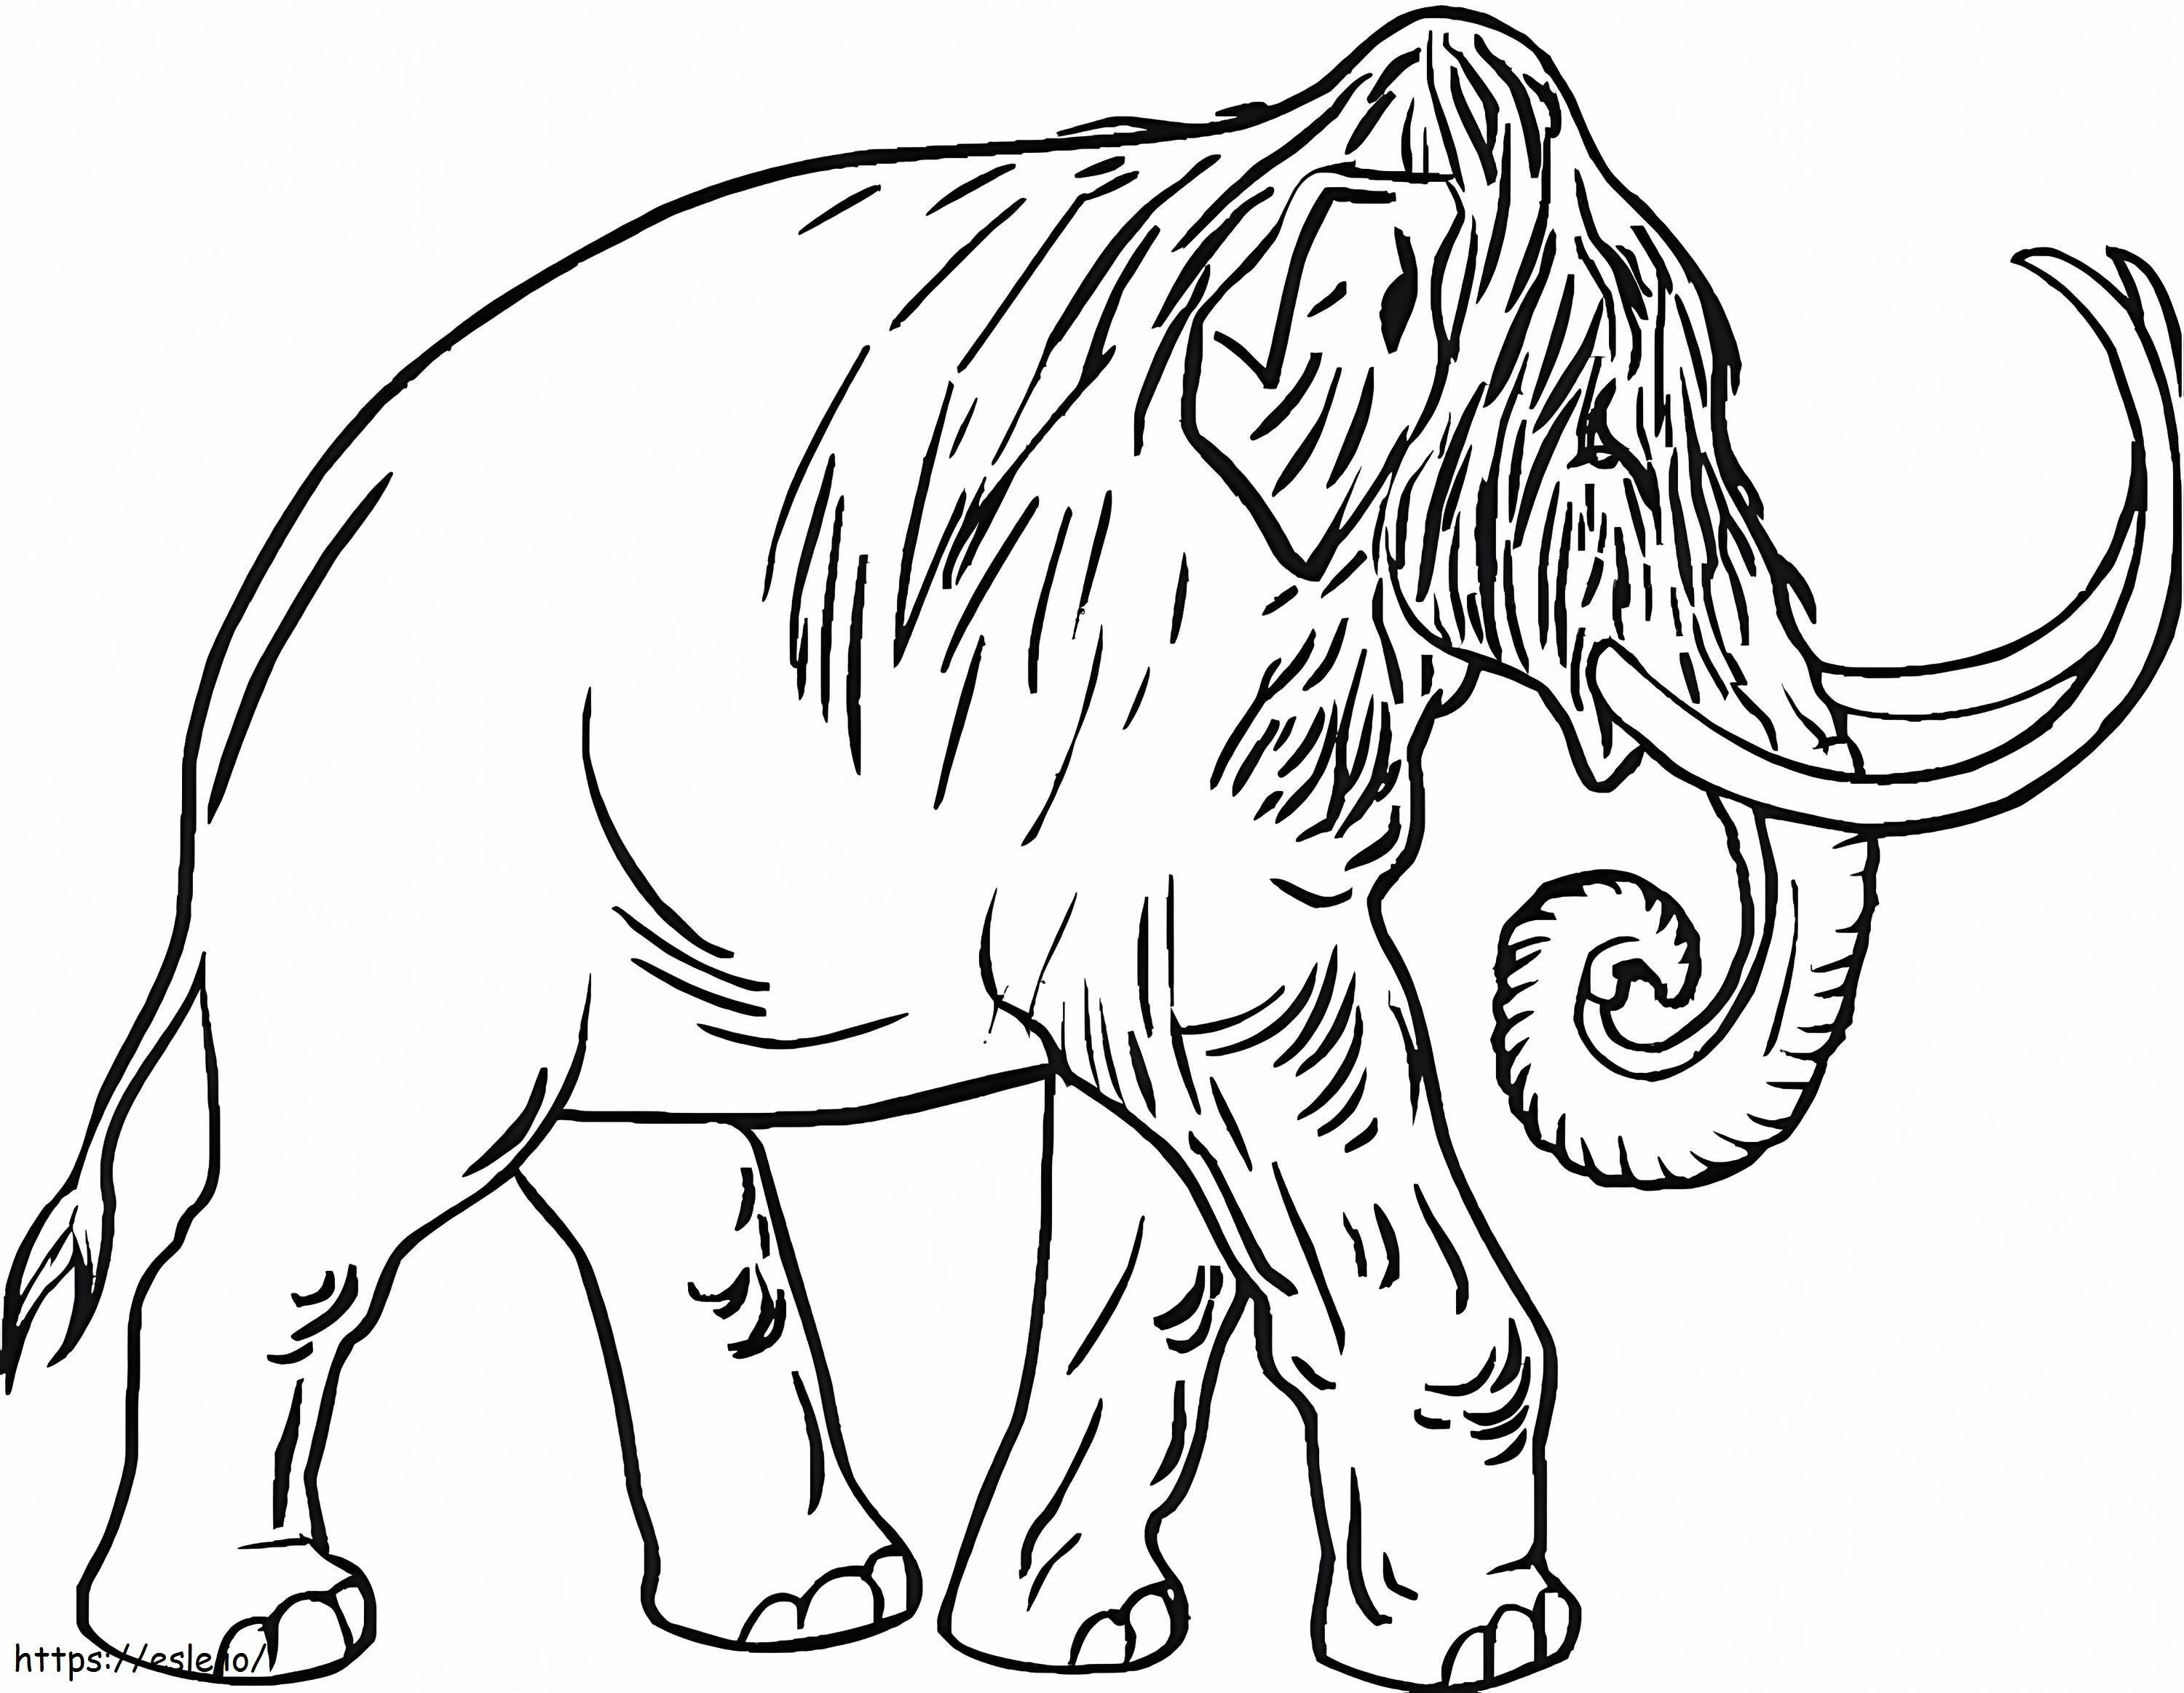 Mammoth Is Walking coloring page